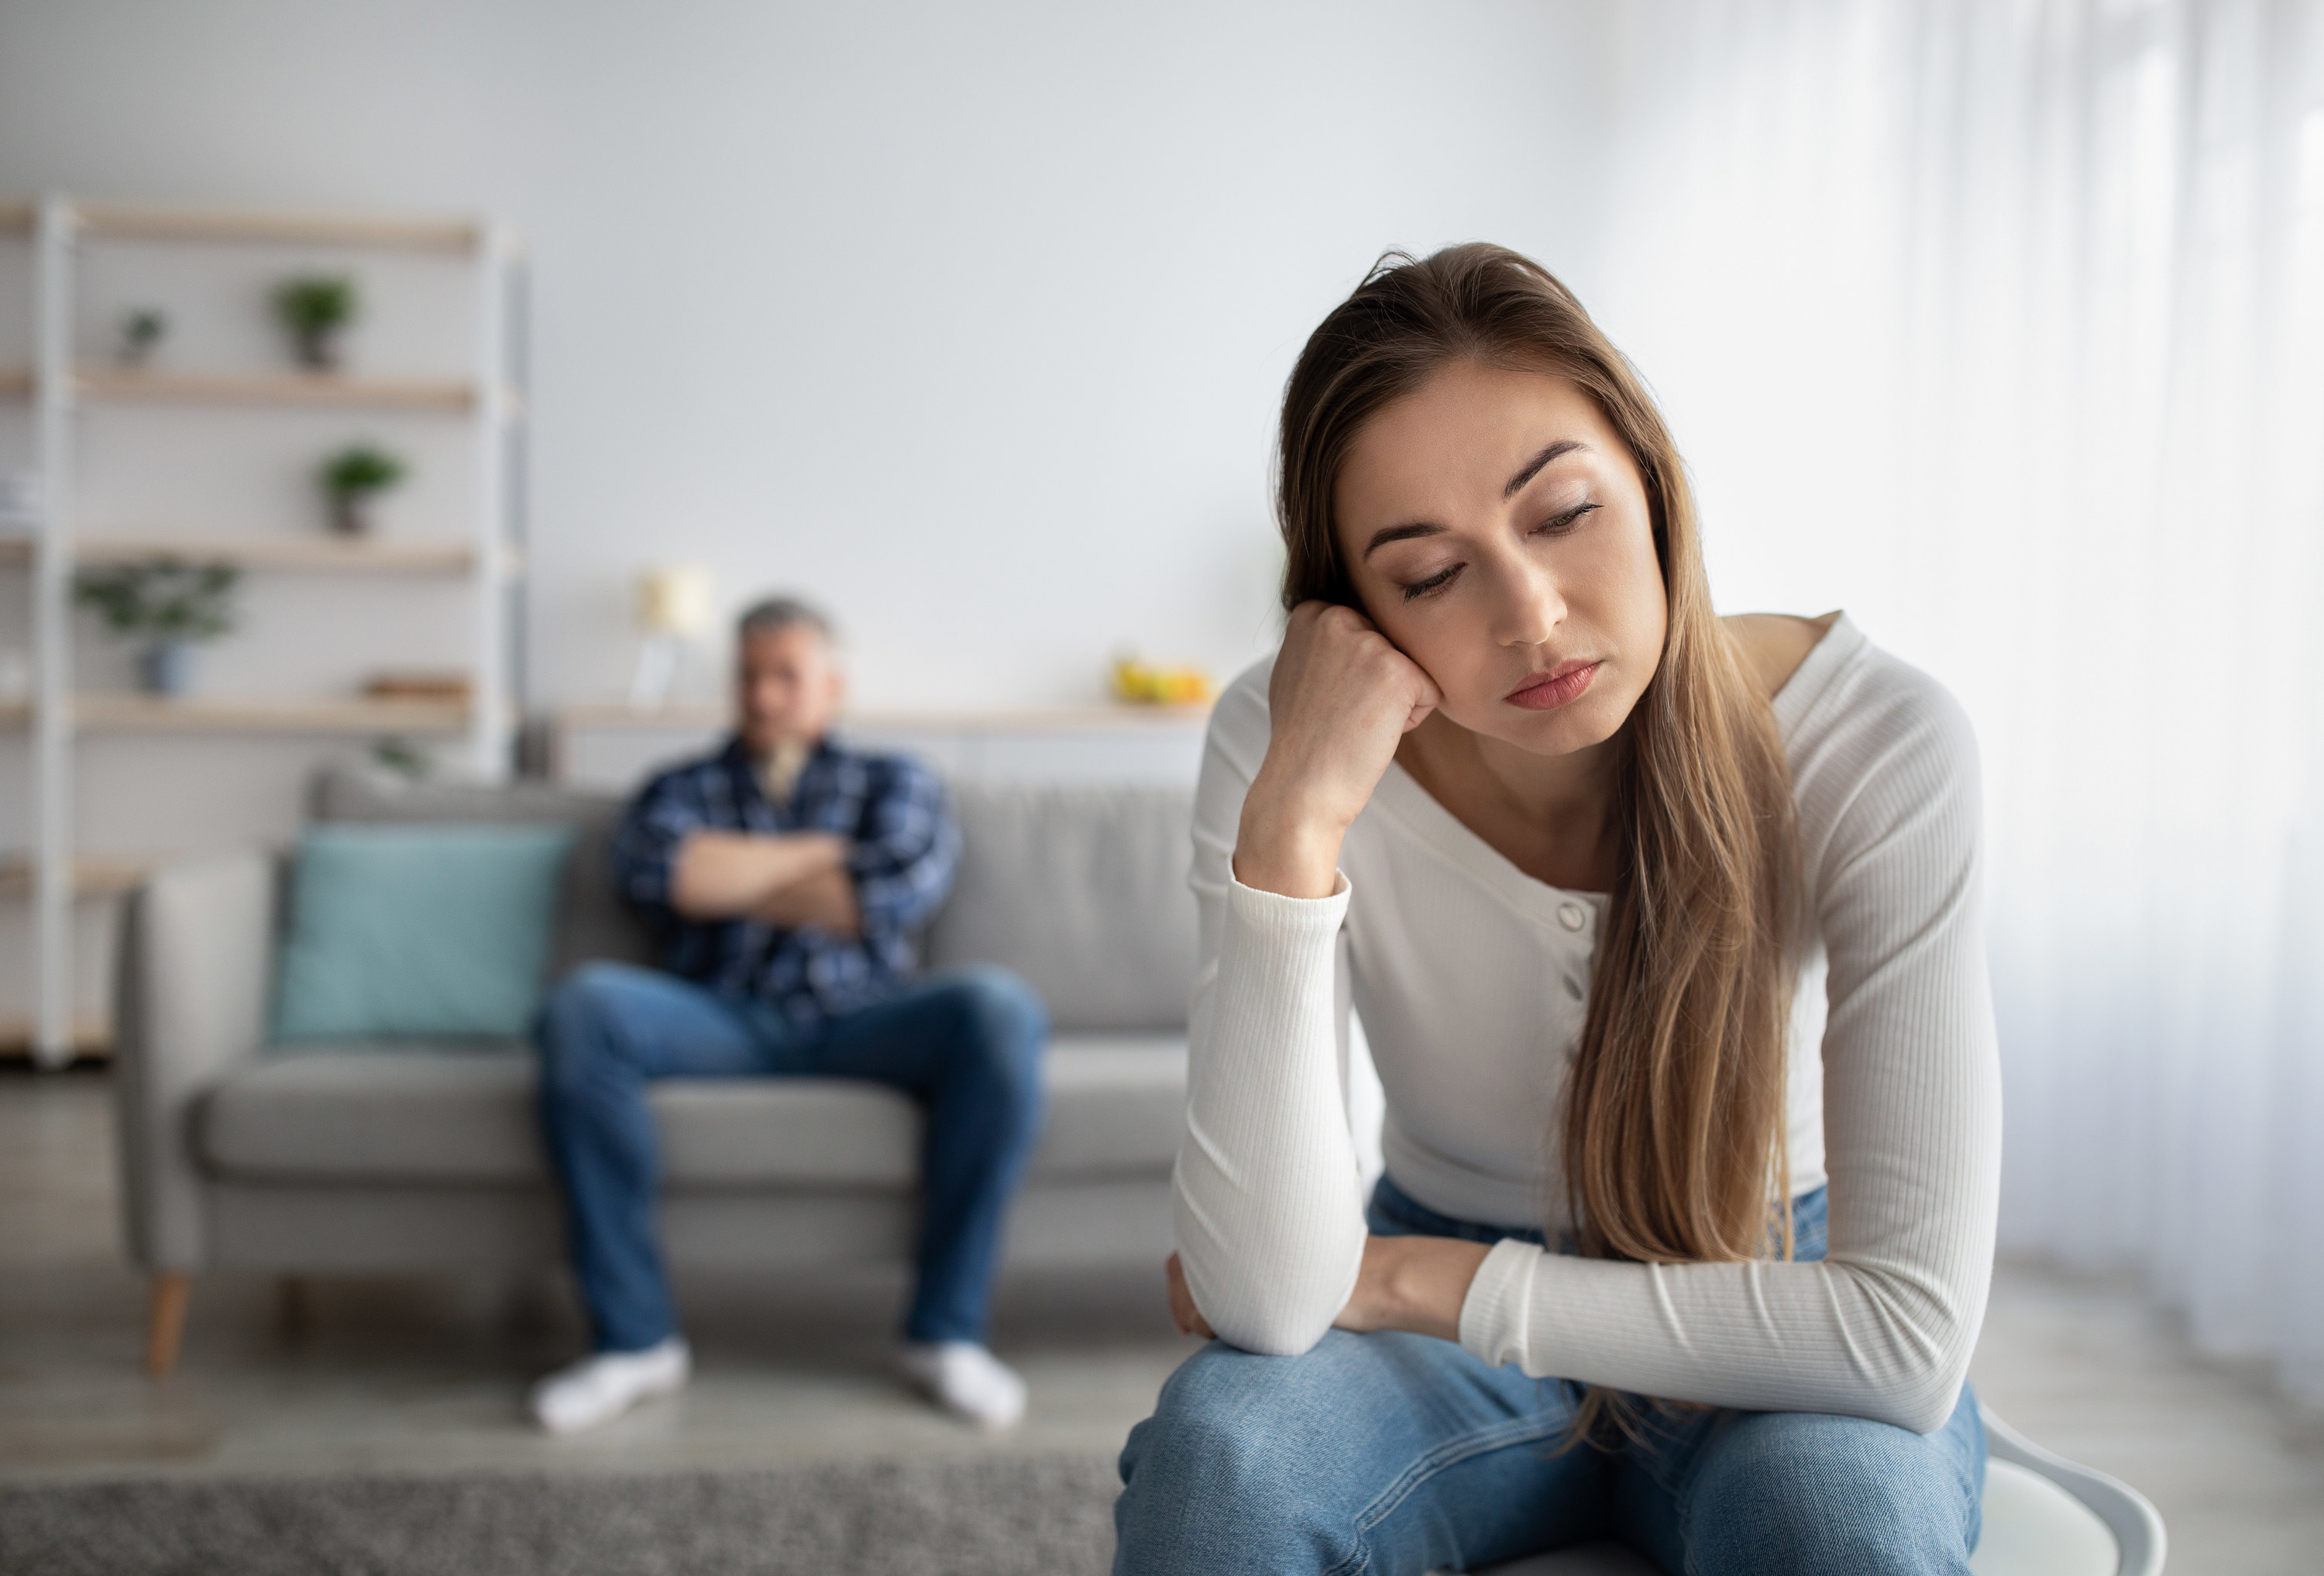 A woman looks upset as she sits at a distance from her partner at home